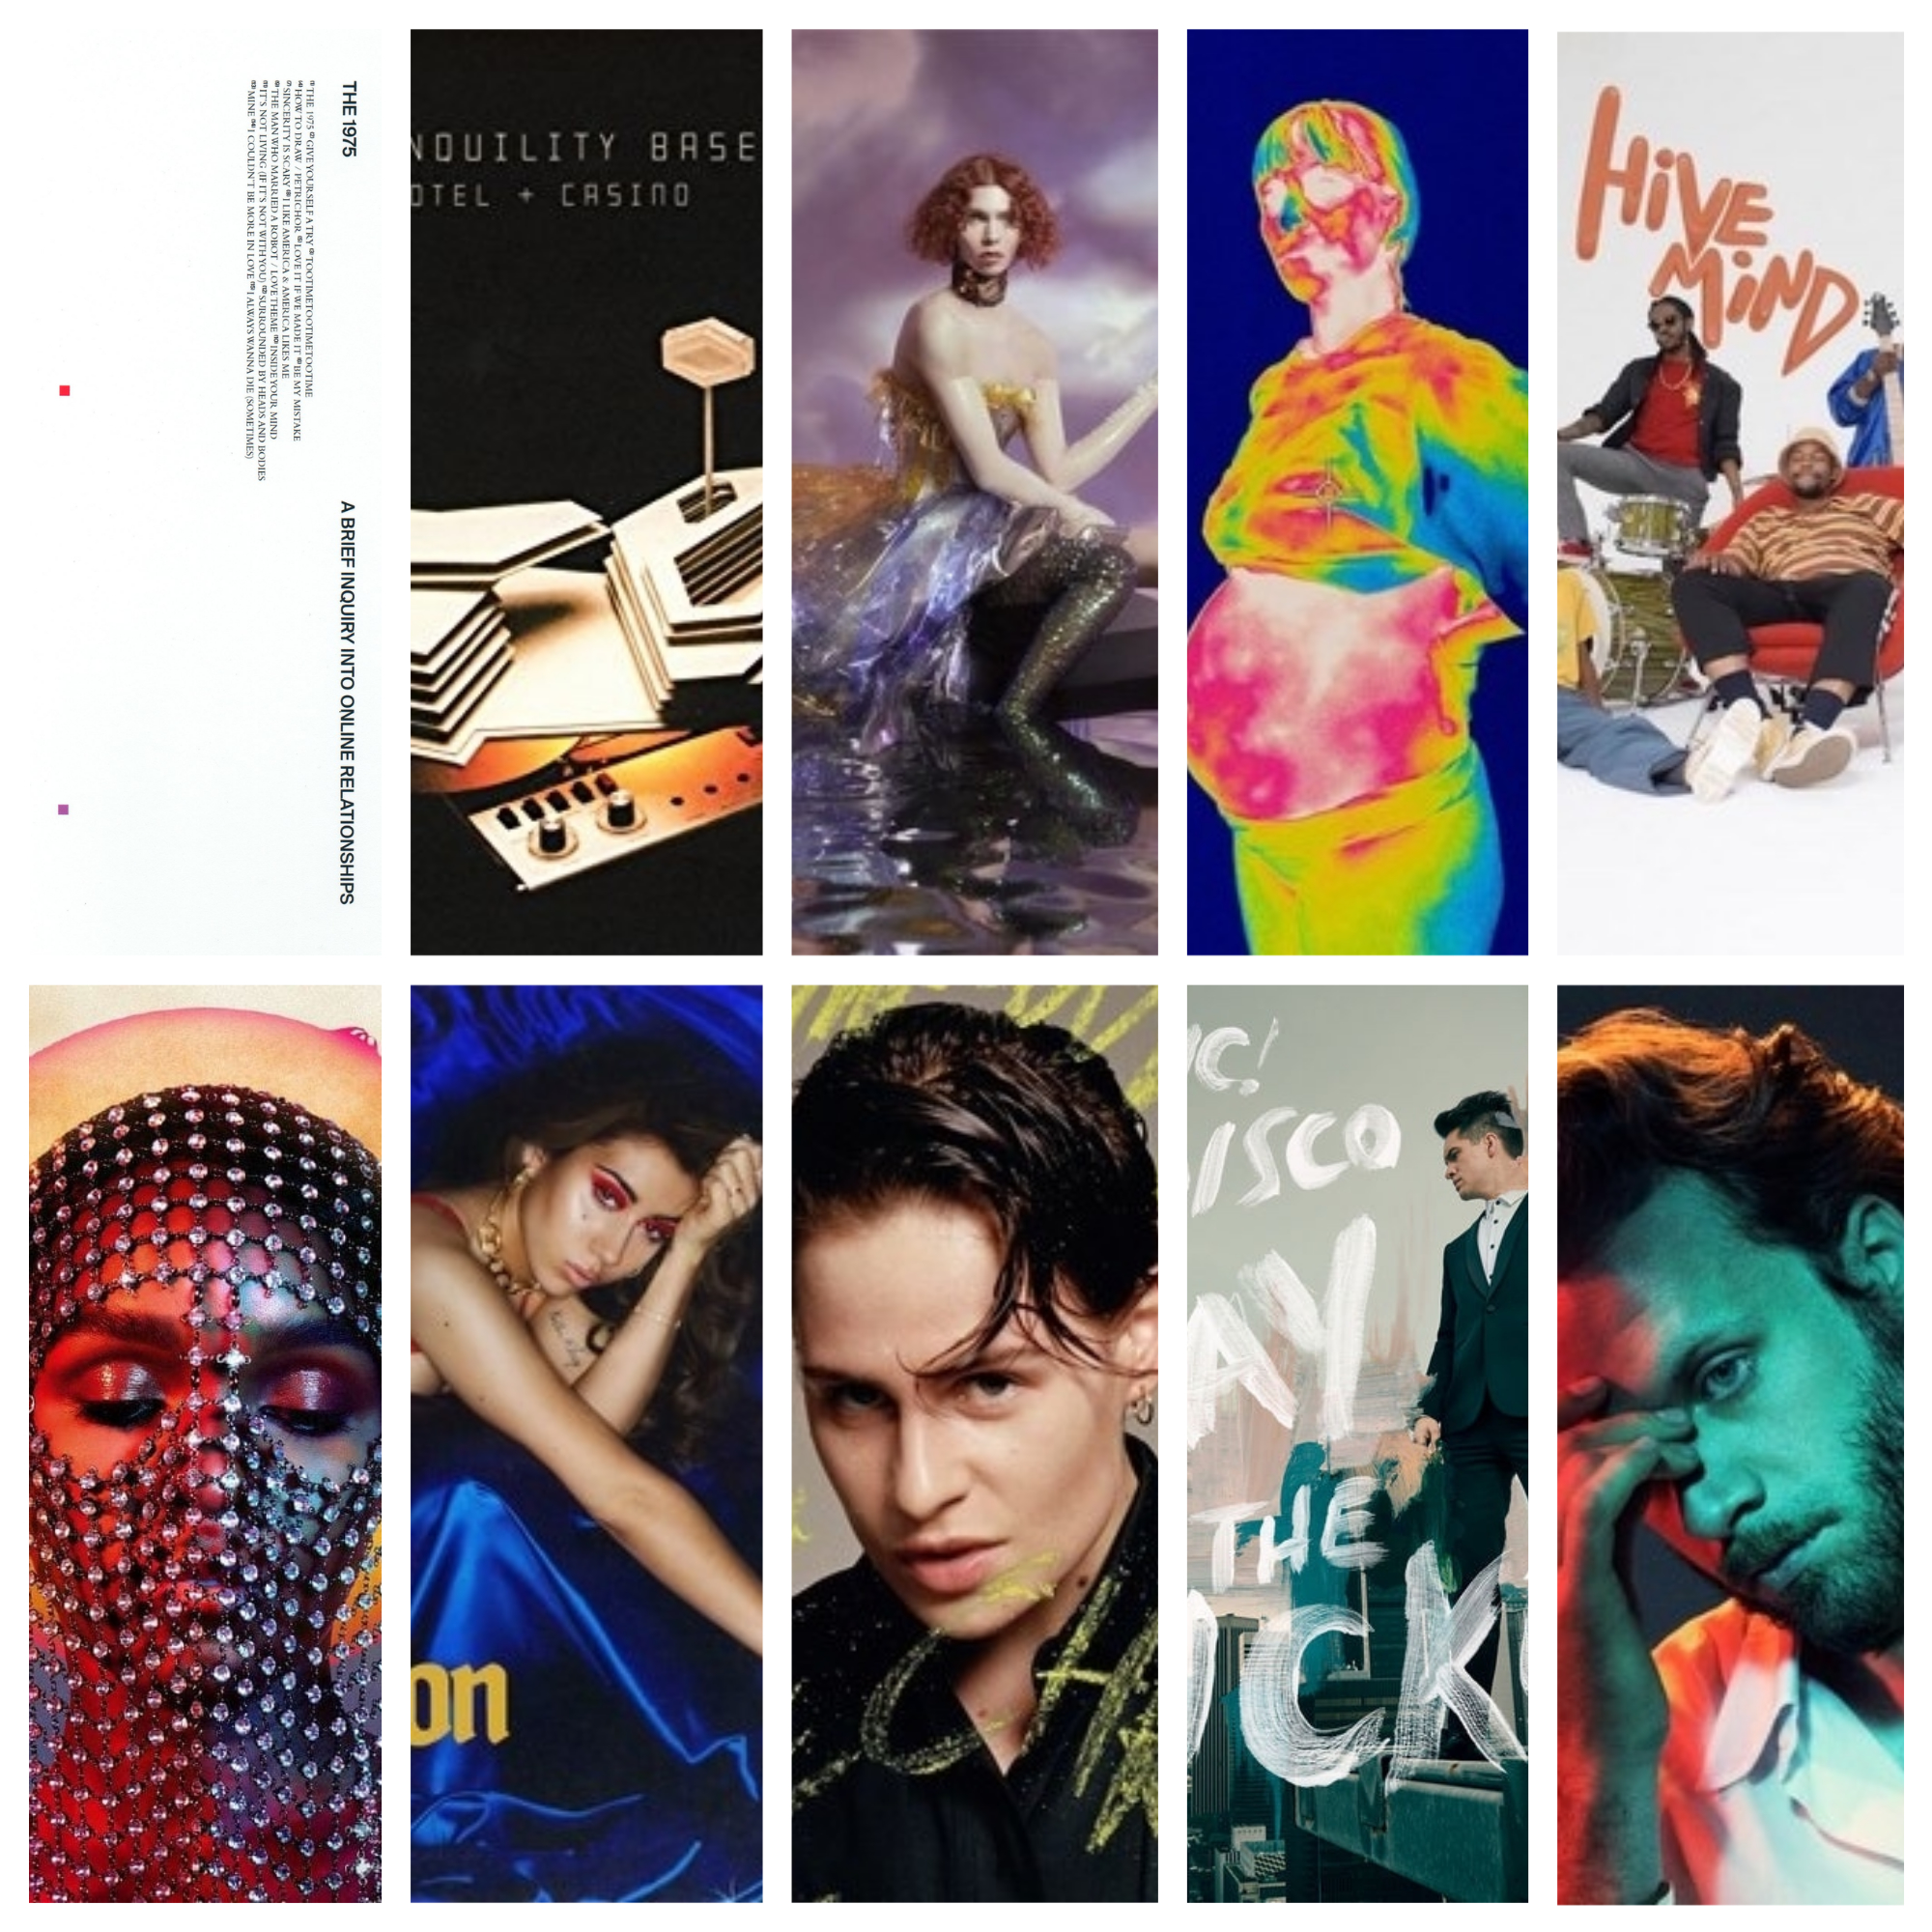 Top 10 Albums of 2018